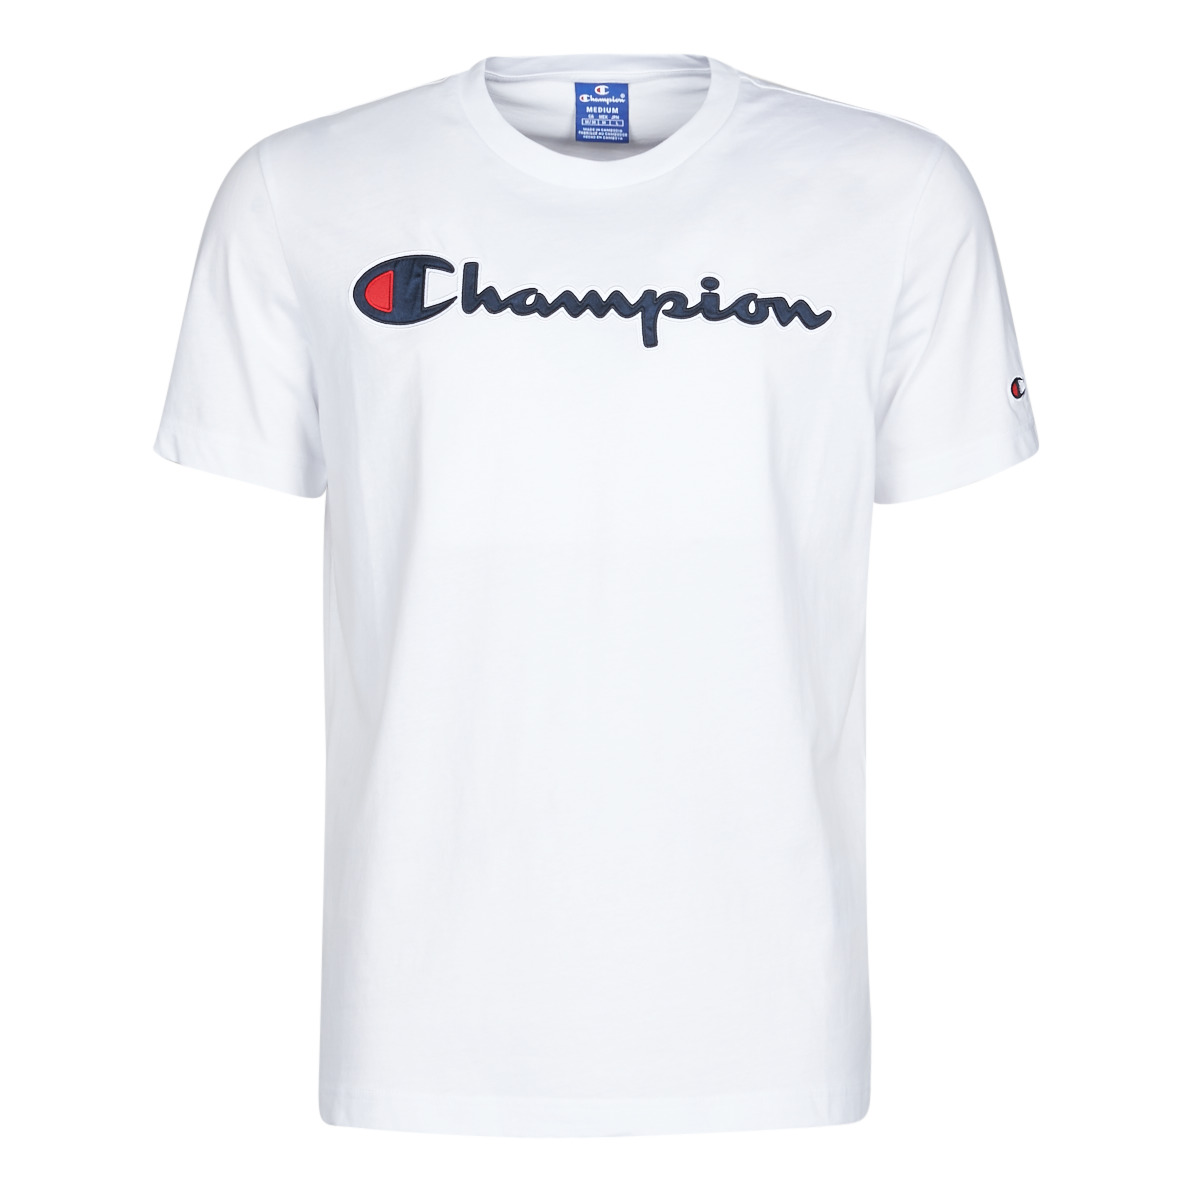 Champion 214194 White Fast delivery Spartoo Europe Clothing  short-sleeved t-shirts Men 33,60 €